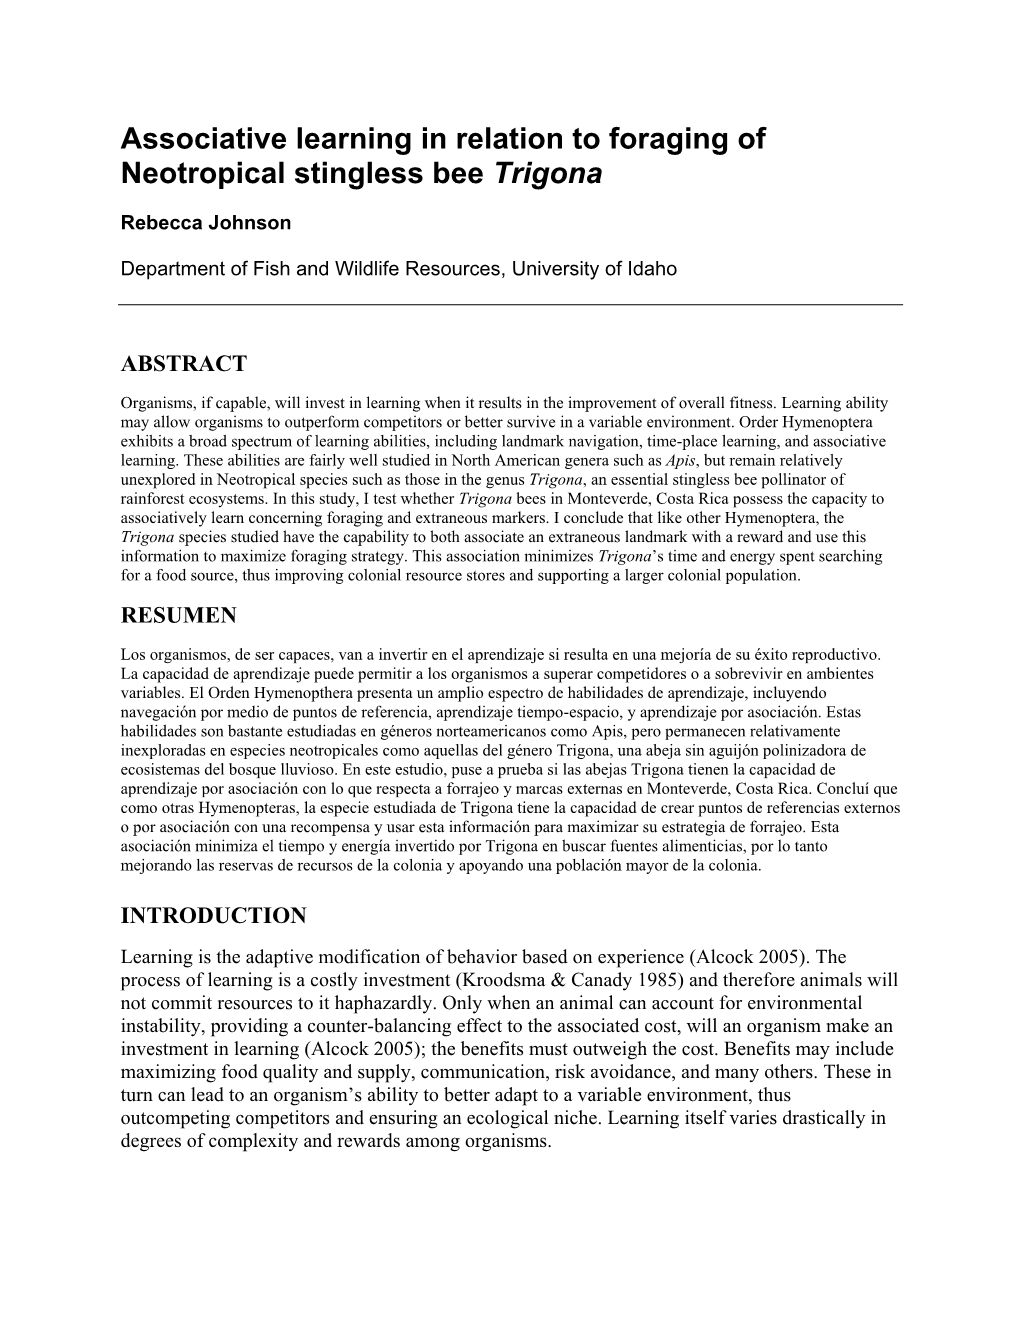 Associative Learning in Relation to Foraging of Neotropical Stingless Bee Trigona